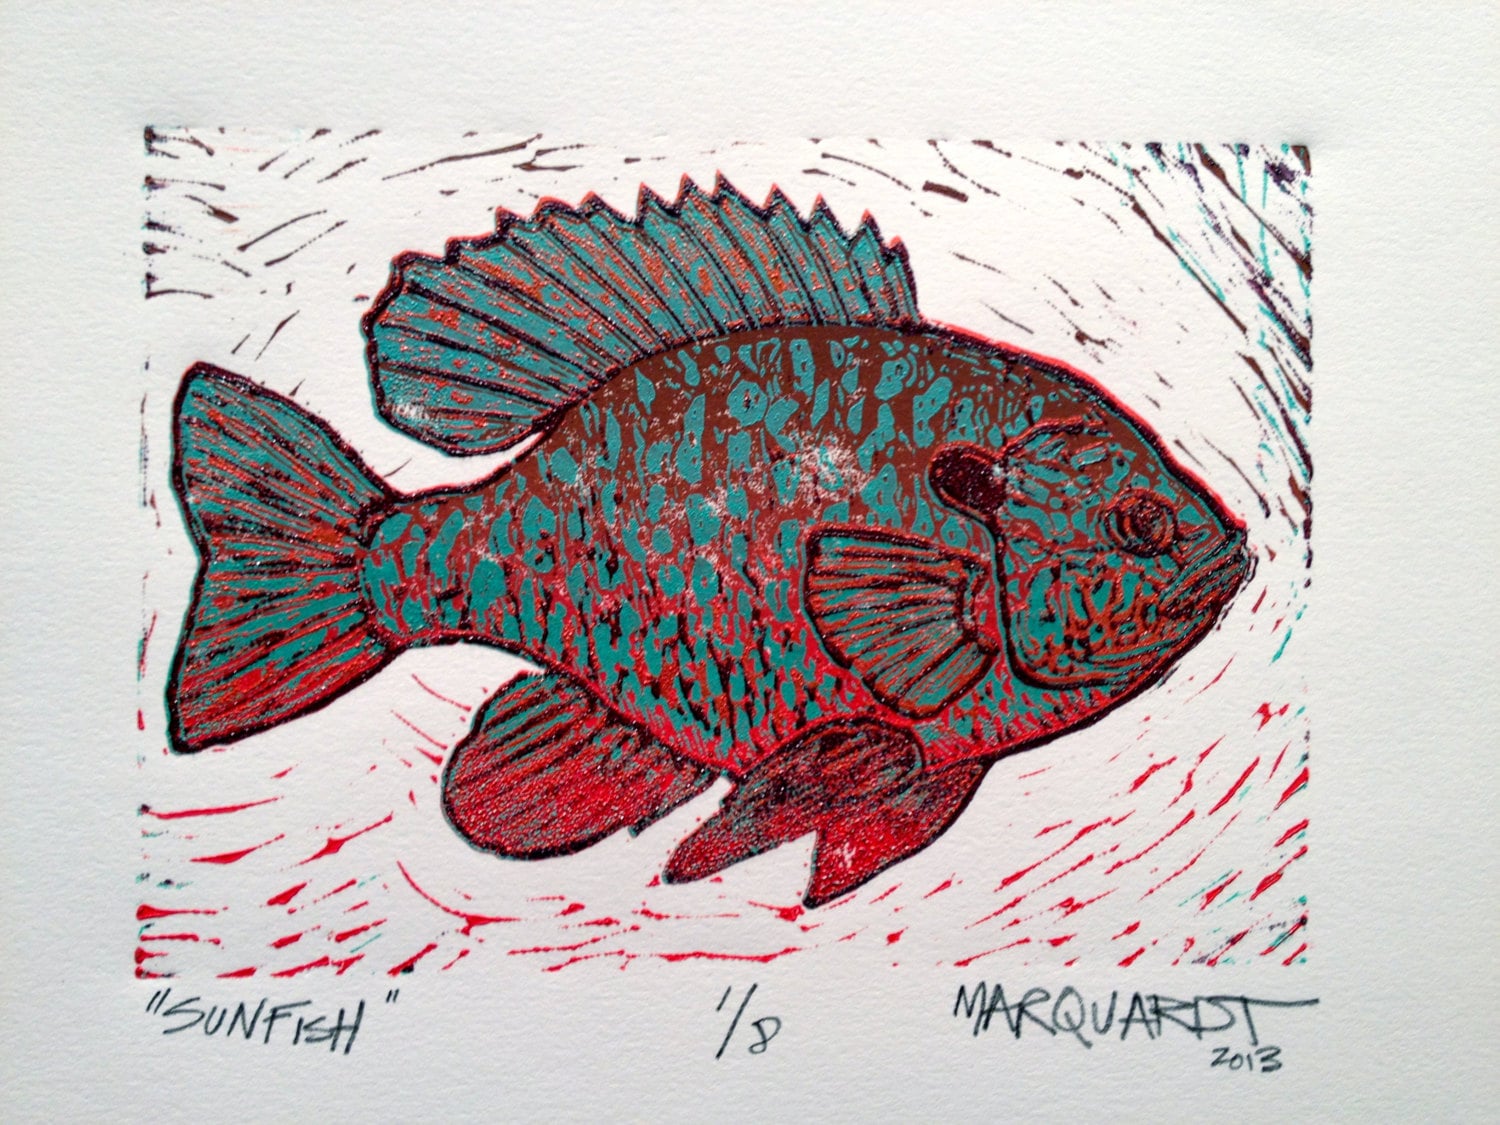 Sunfish reduction 5 color linocut print fly fishing artwork by